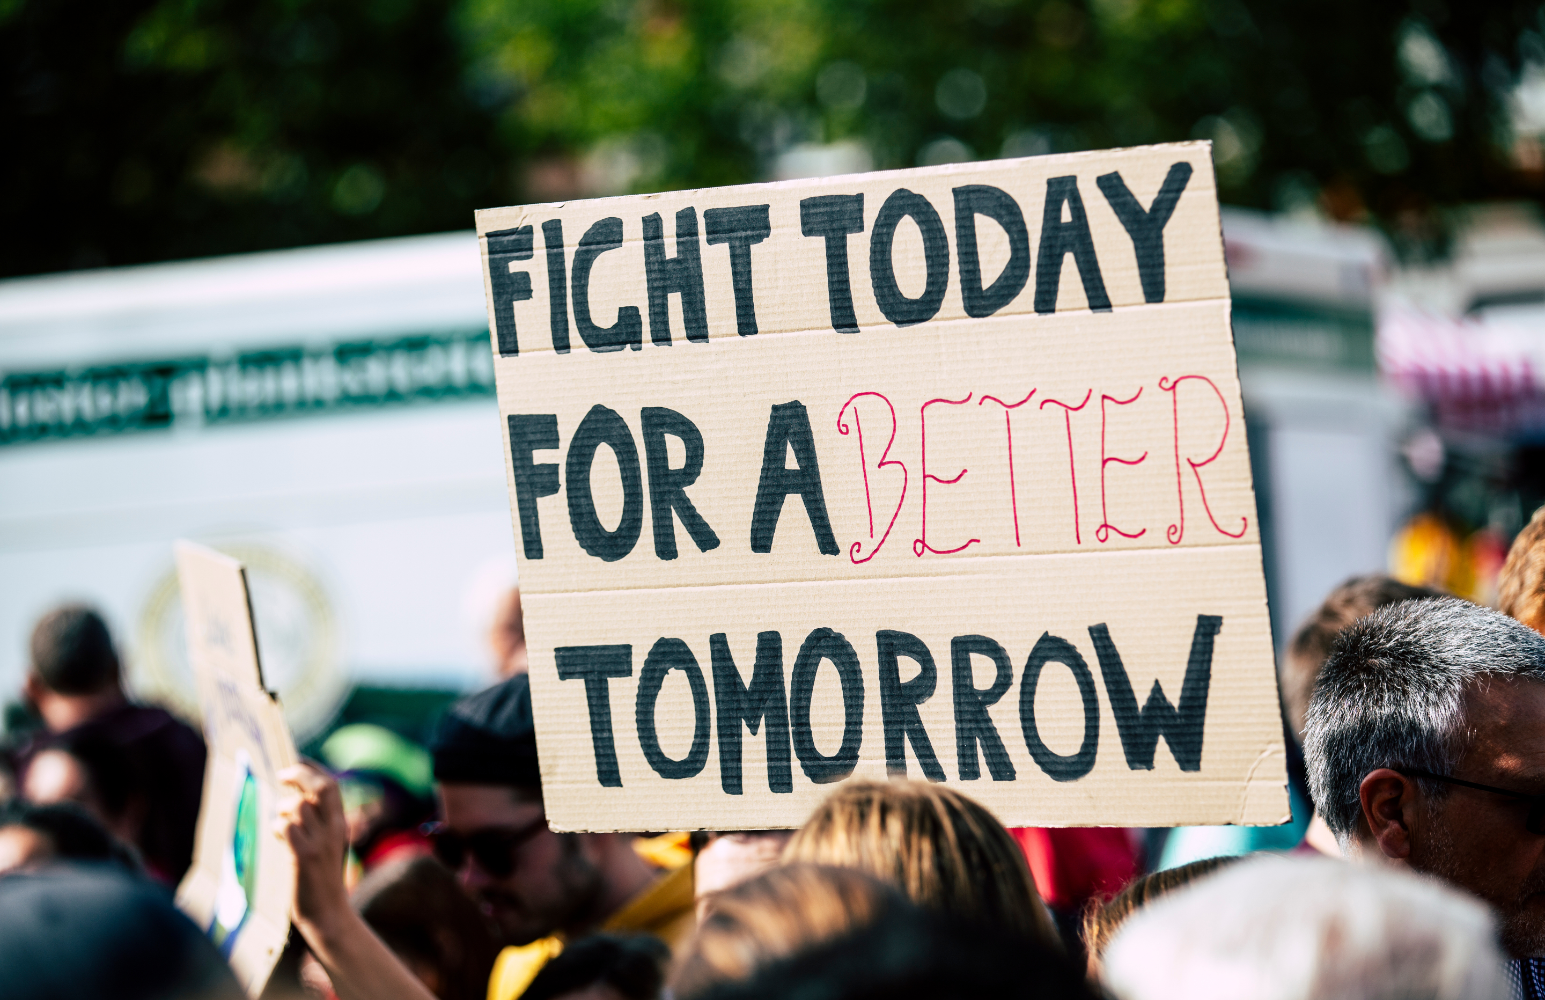 Strike/protest sign: "Fight today for a better tomorrow"